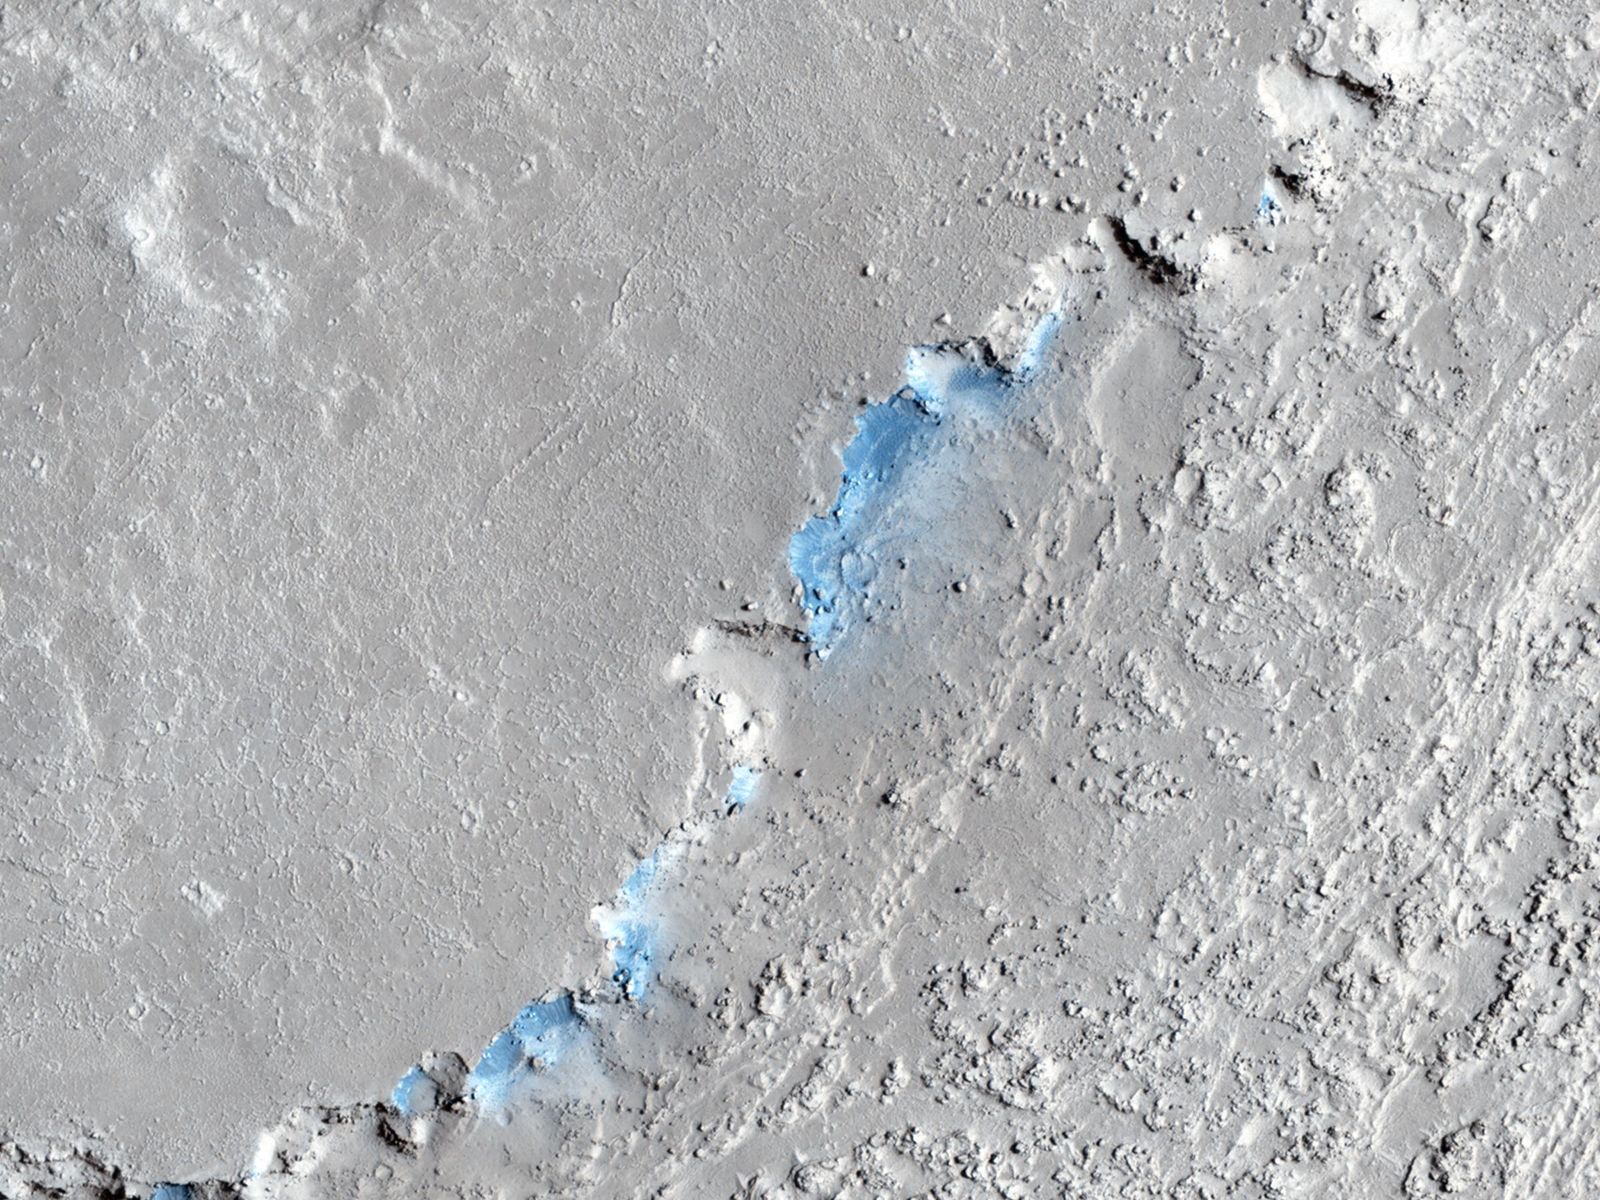 Space Image Sand Sources Near Athabasca Valles